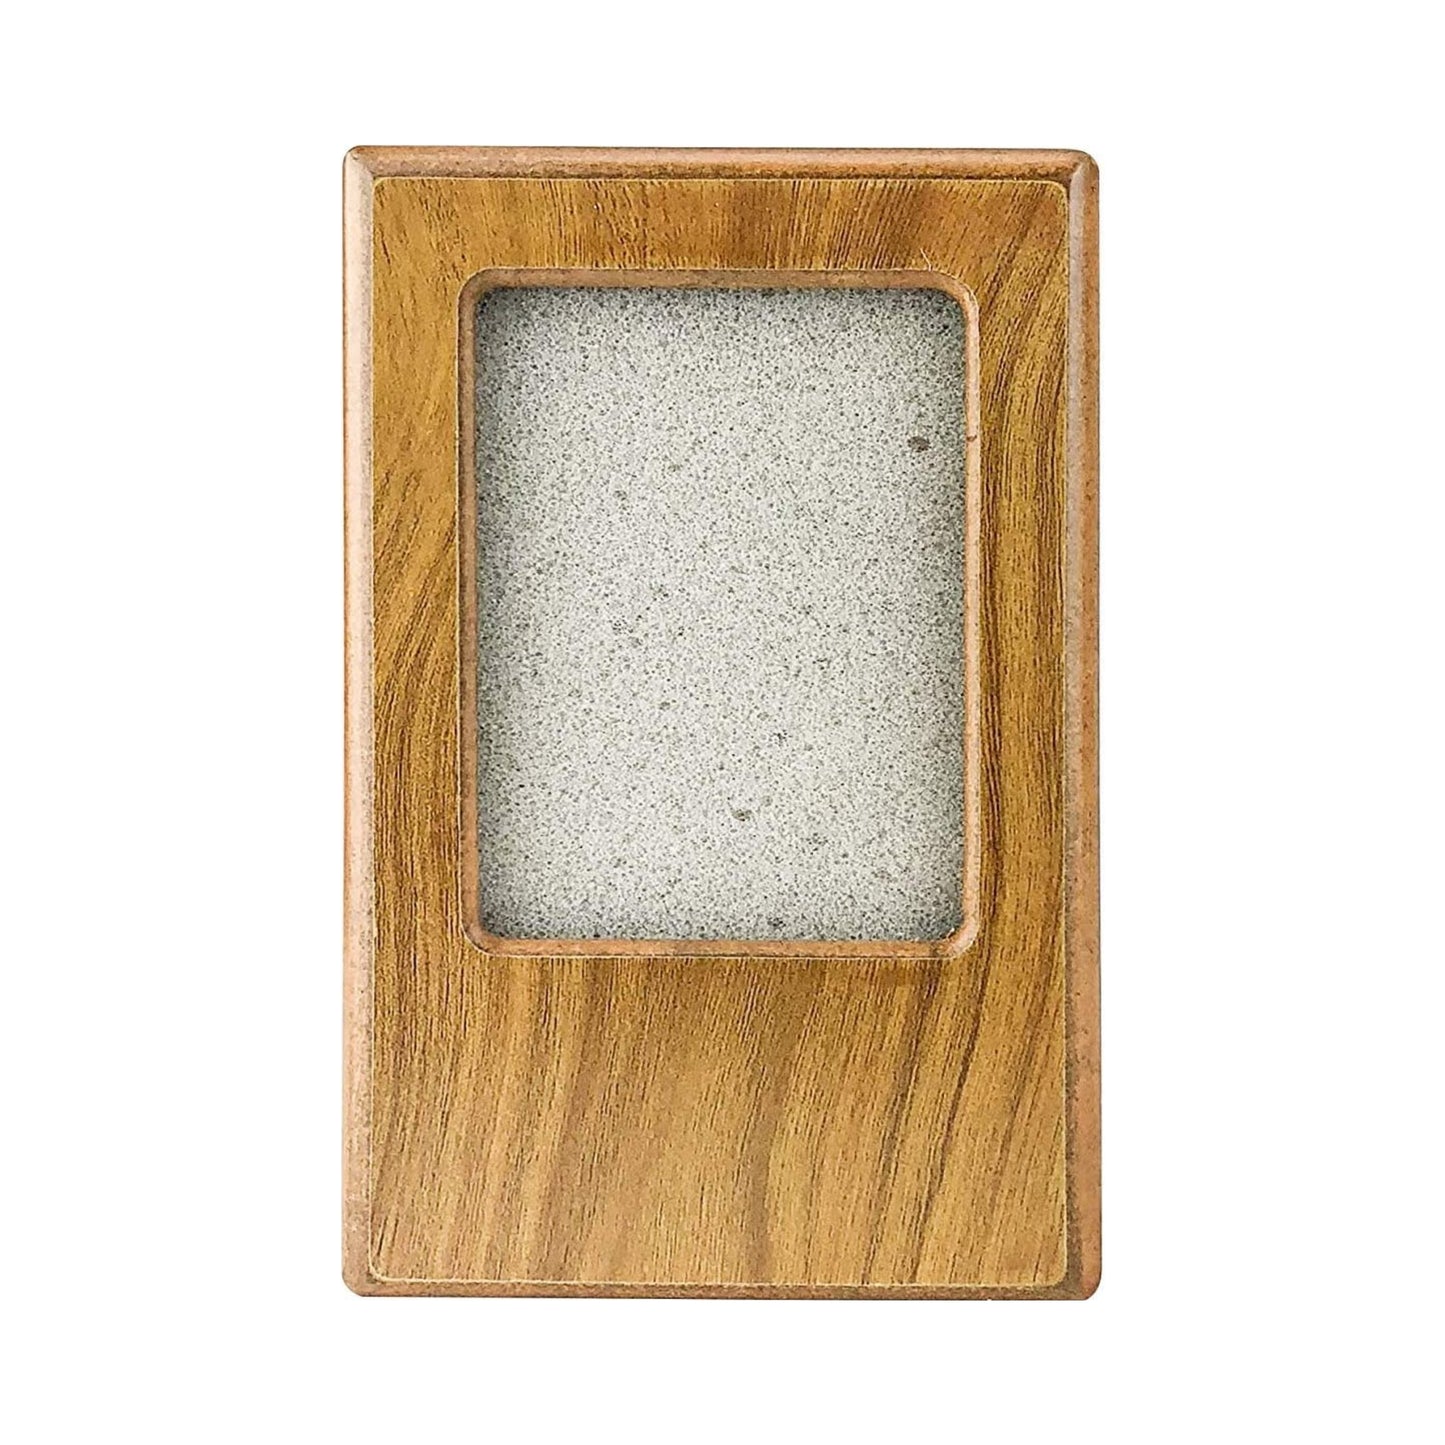 Midlee Oak Picture Frame Pet Urn 5" x 3.75" x 3.5", Up to 10lb Pet